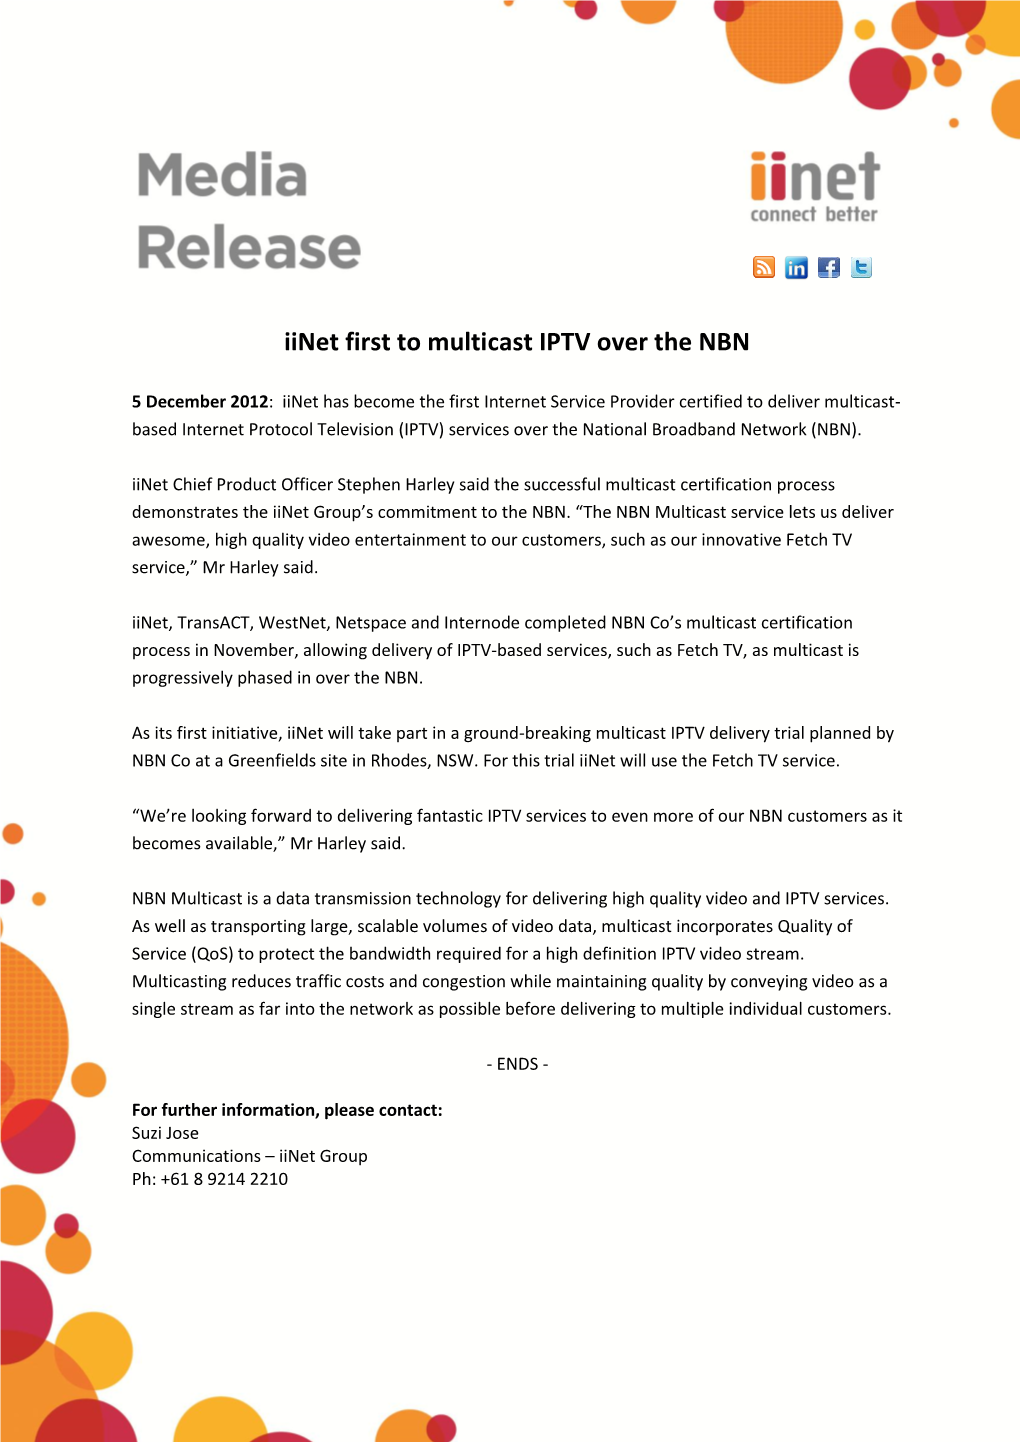 Iinet First to Multicast IPTV Over the NBN